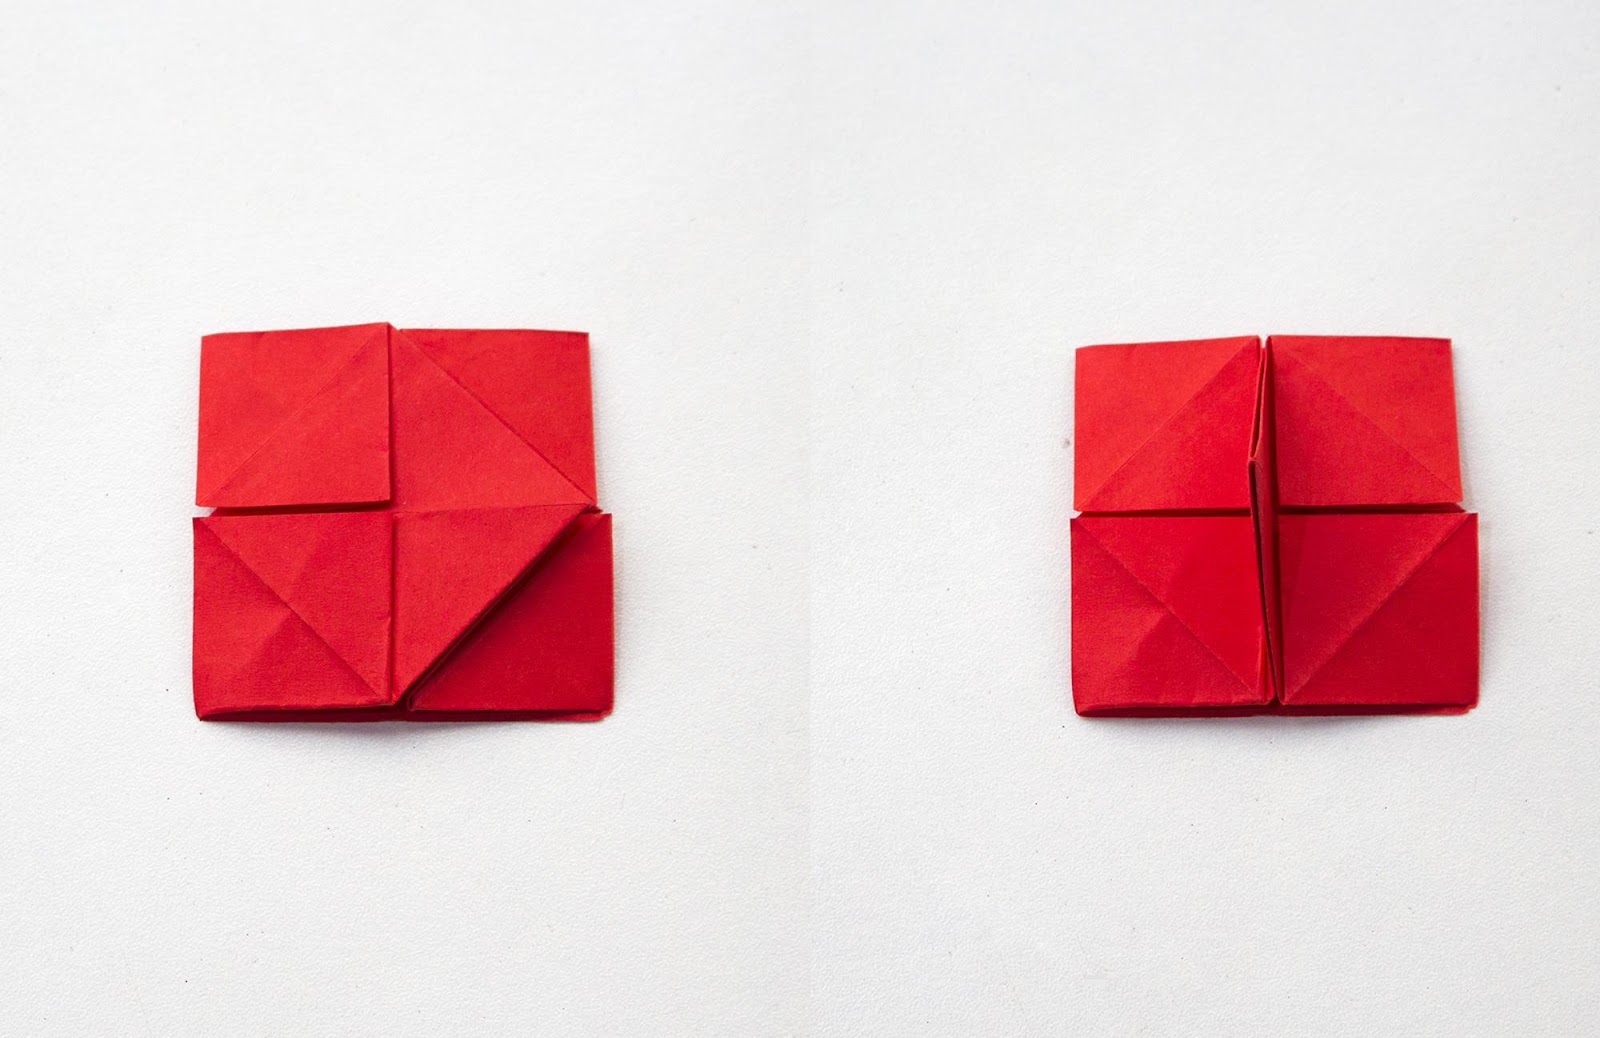 A red sheet of paper with many folds shows two inner triangles pulled toward the center